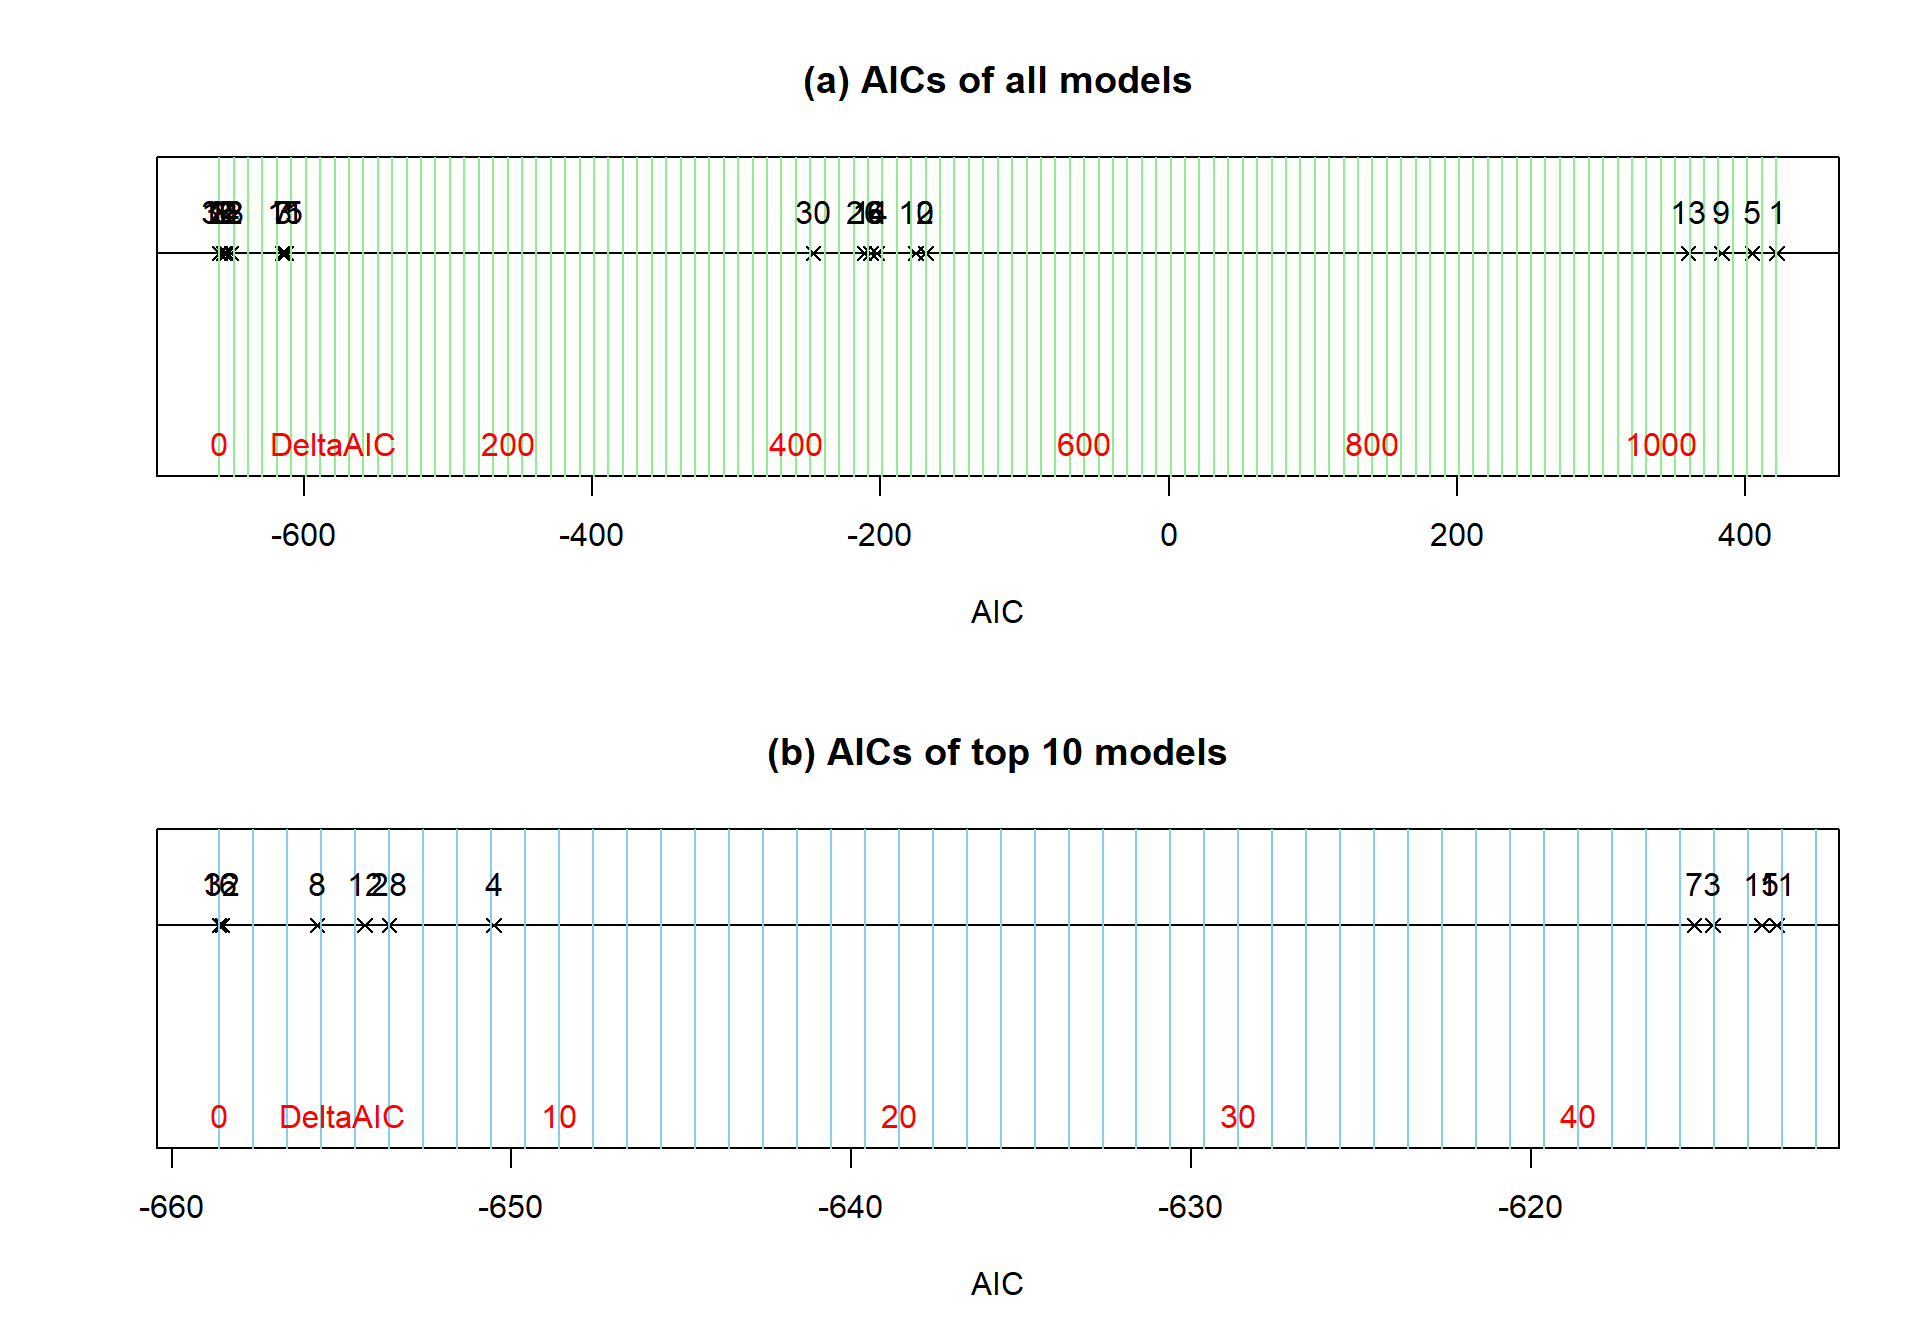 Display of AIC results on a number line with models indicated by their number in the dredge output. In more complex models, the dredge model numbers are just labels and not a meaningful numeration of the models being considered (there are 20 models considered here but labels go up to 32). Panel (a) presents results for all the models and panel (b) focuses just on the top 10 models so some differences in those models can be explored. Note that the spacing of the vertical grid lines in panel (a) are 10 AIC units and in (b) they are 1 AIC unit apart.